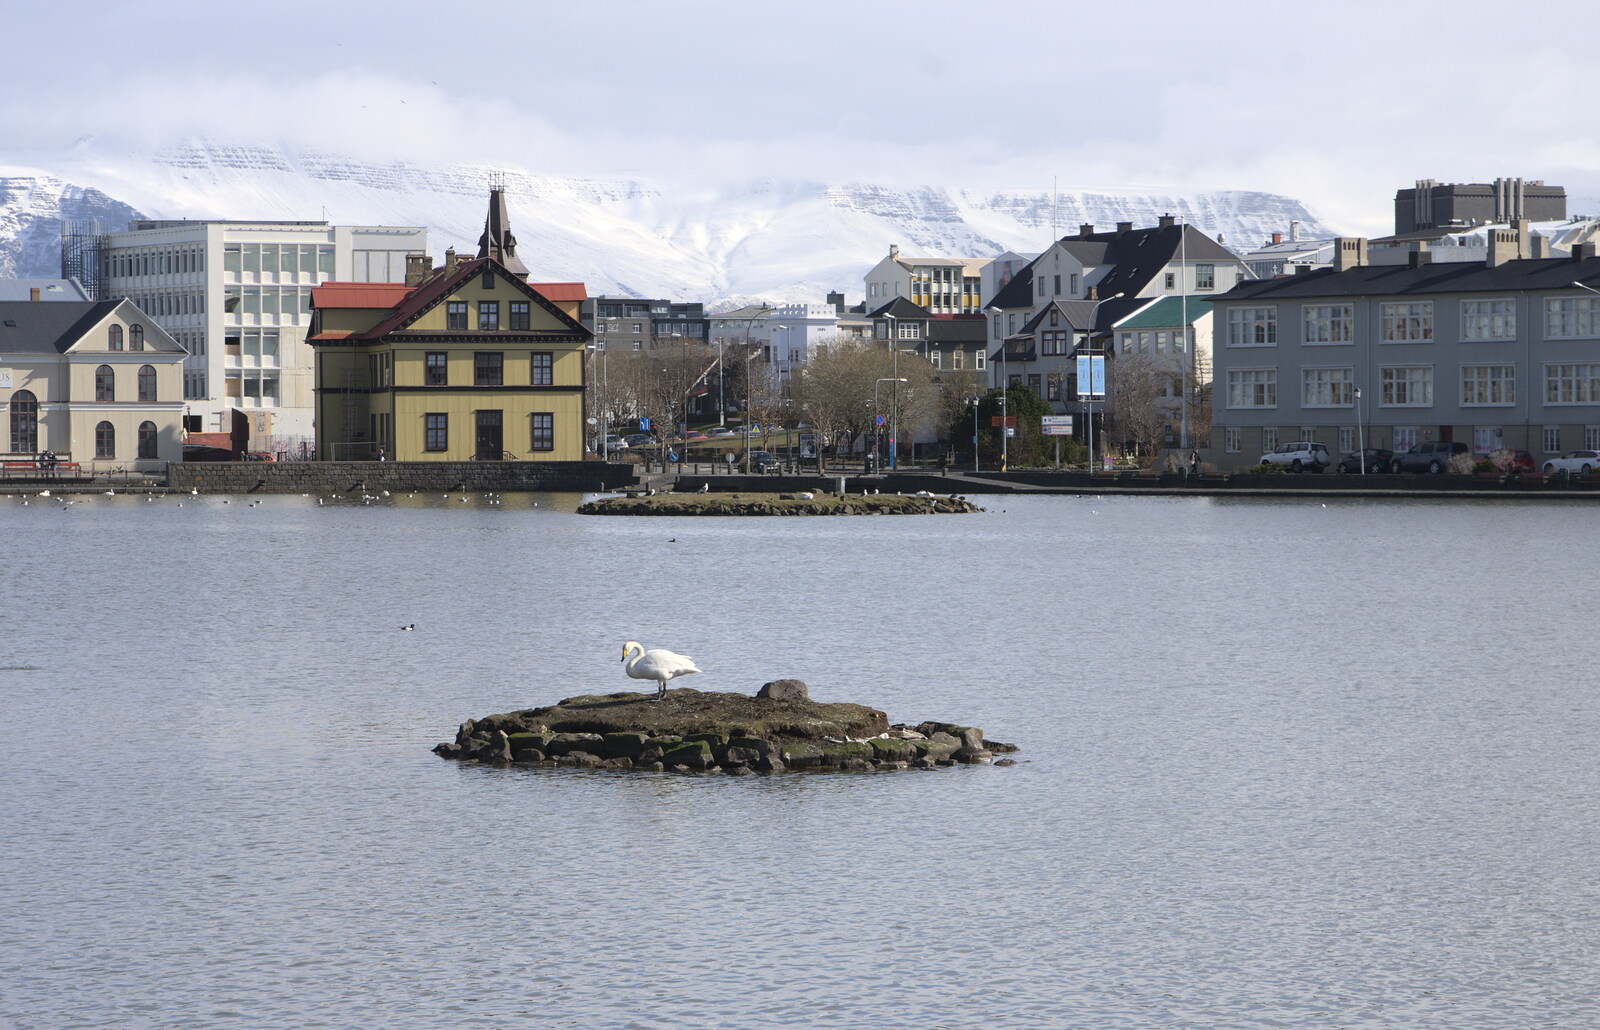 The pond, or Tjörnin from Hallgrímskirkja Cathedral and Whale Watching, Reykjavik - 21st April 2017